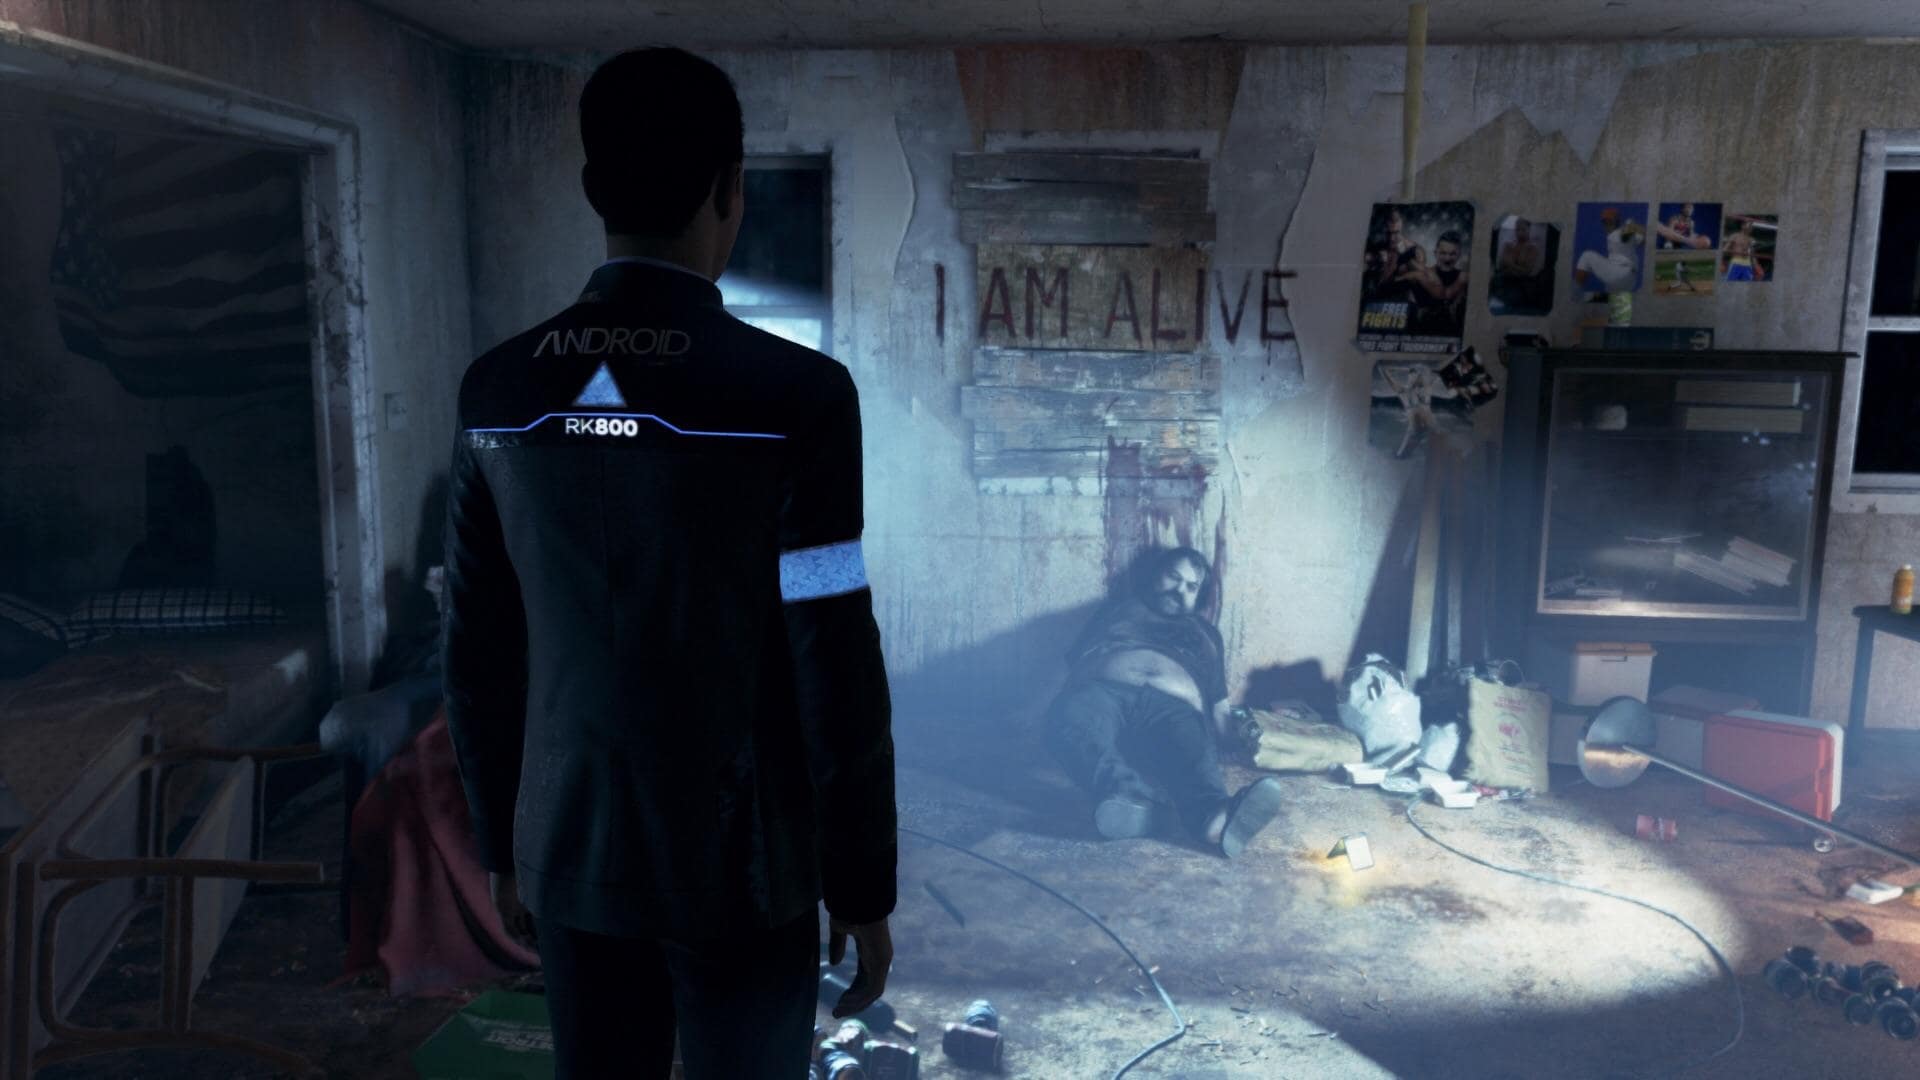 Detroit Become Human gameplay video shows a world of possibilities